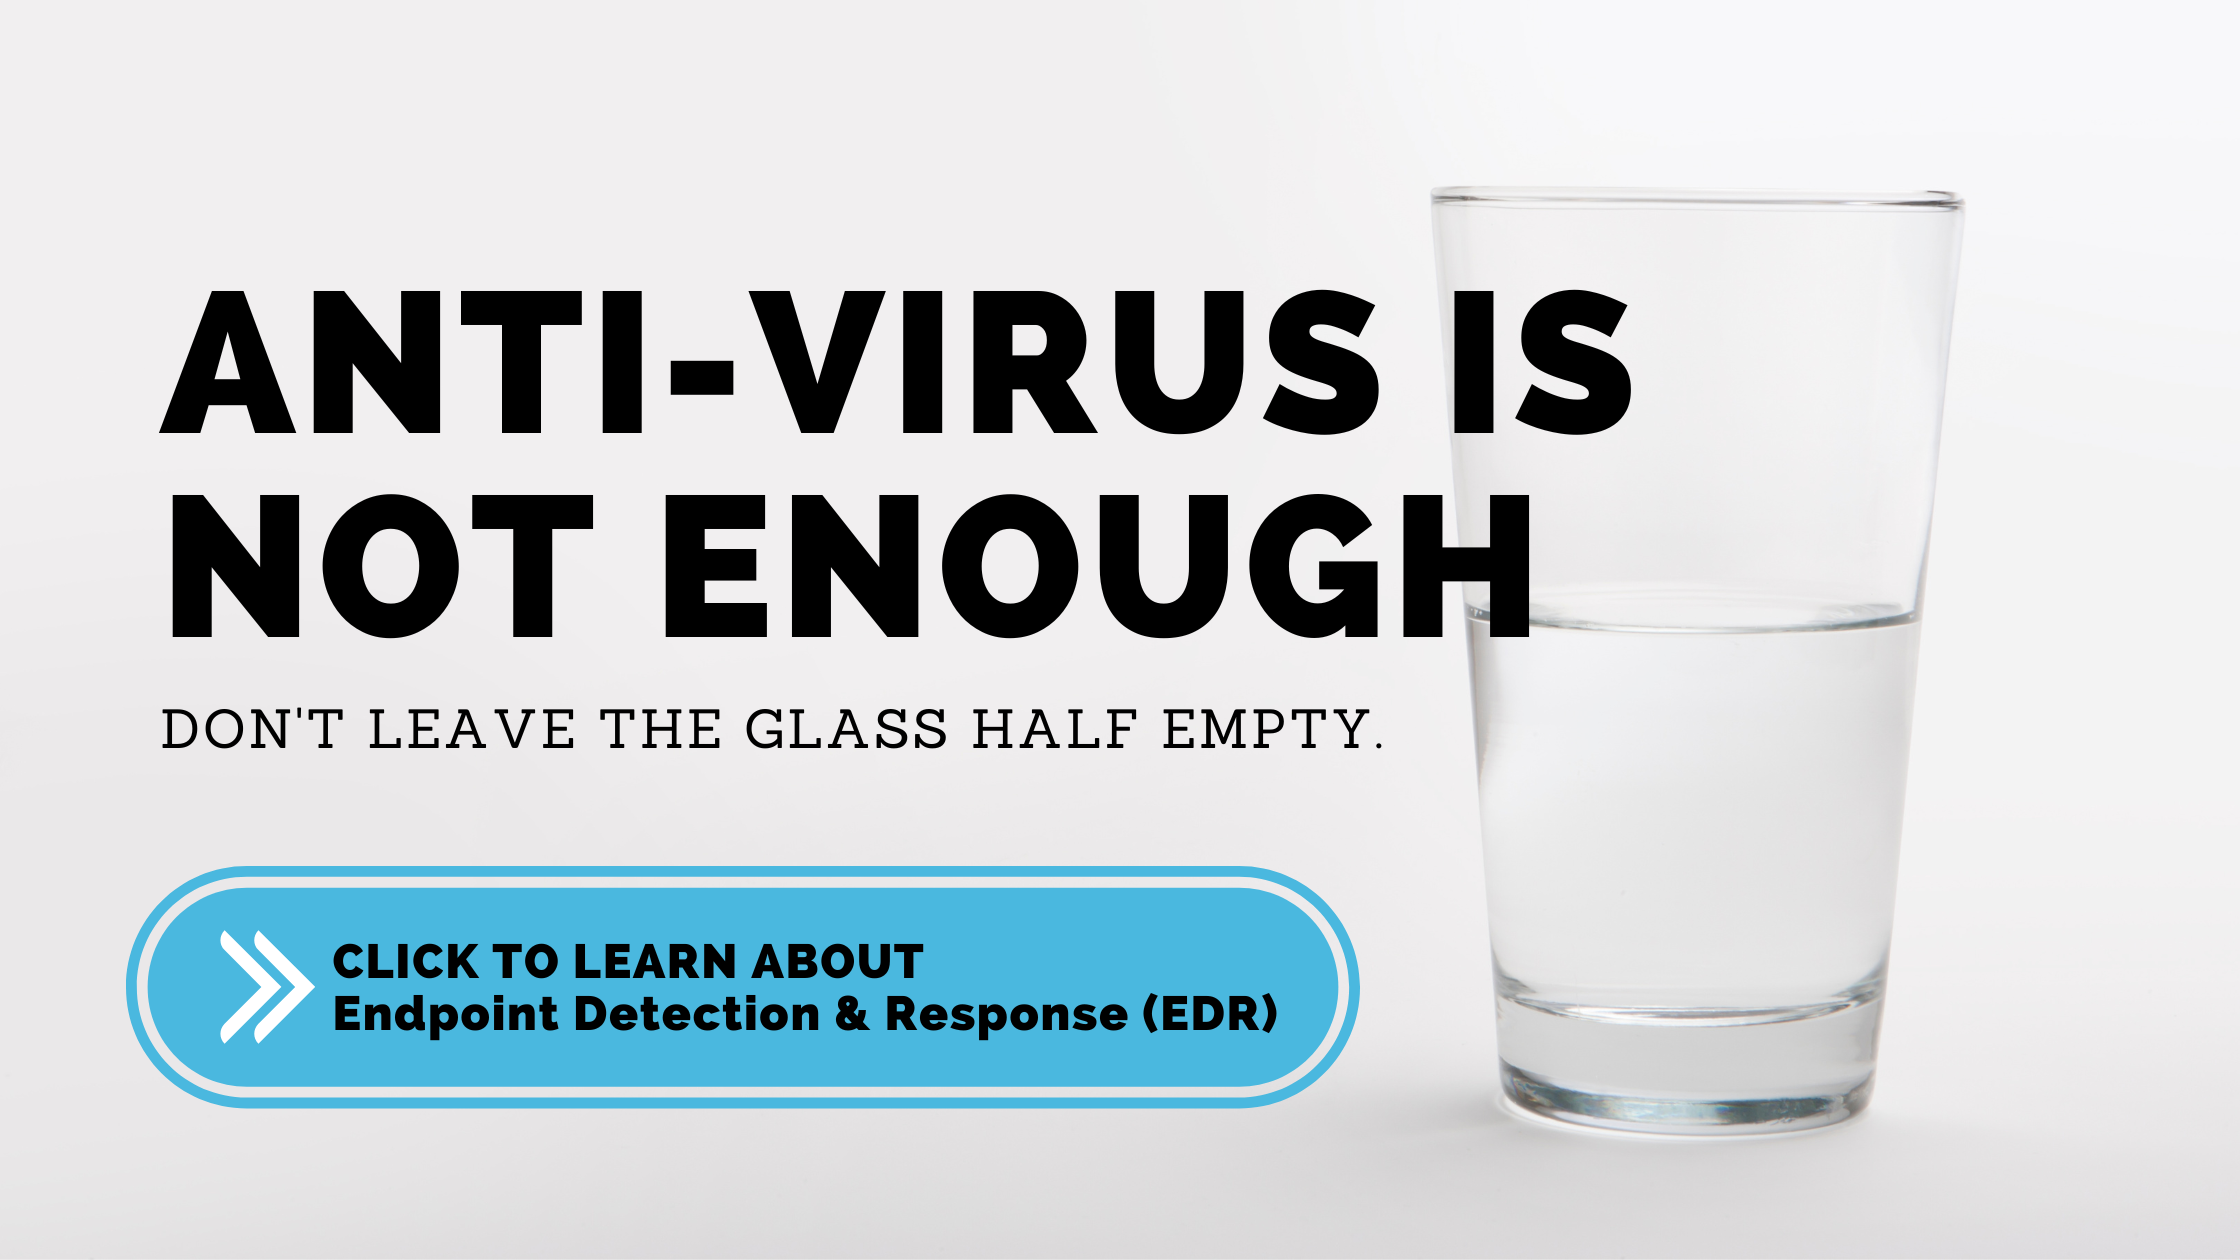 Anti-virus is not enough: Endpoint detection and response (EDR)